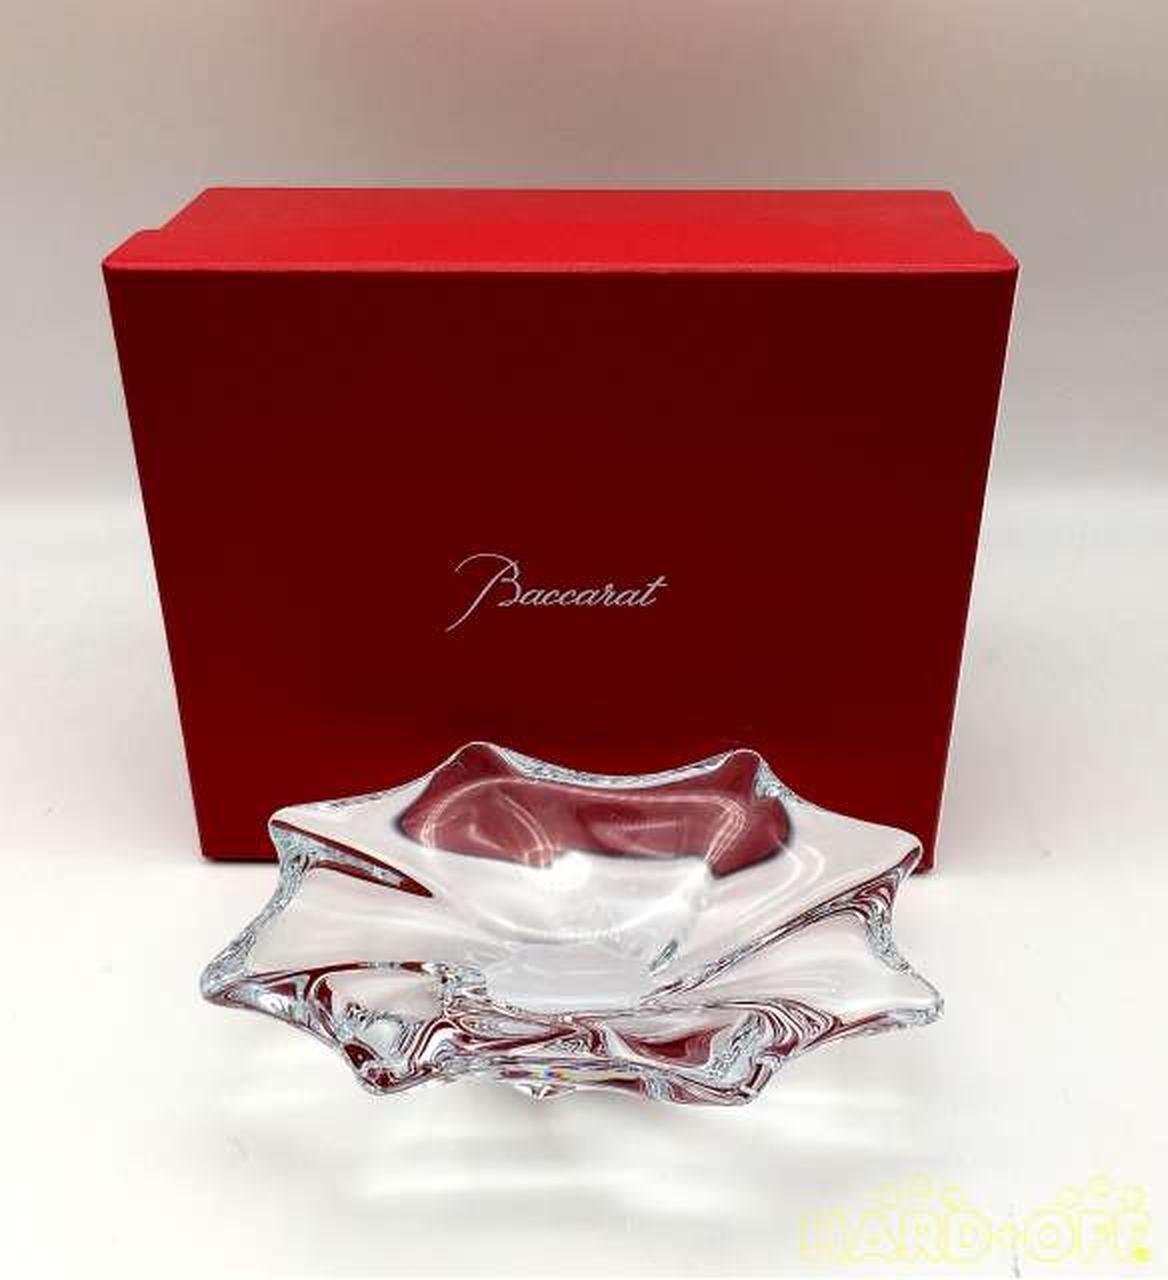 Baccarat 17.0 cm Cadix Ashtray Clear Color Crystal Glass Made in France With Box